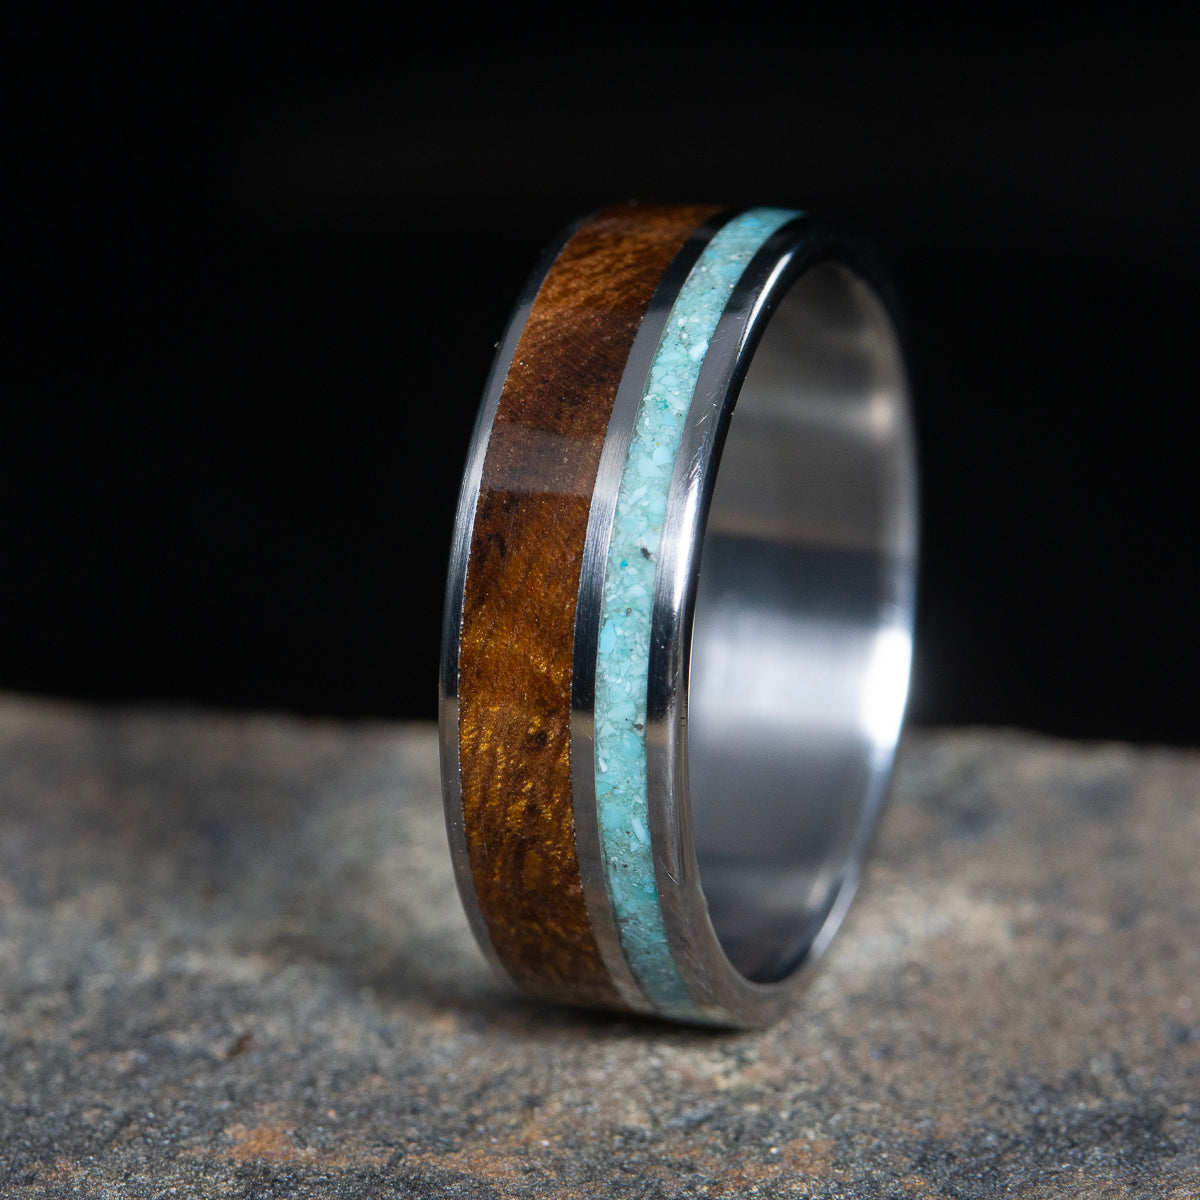 Turquoise and ironwood wooden inlay ring